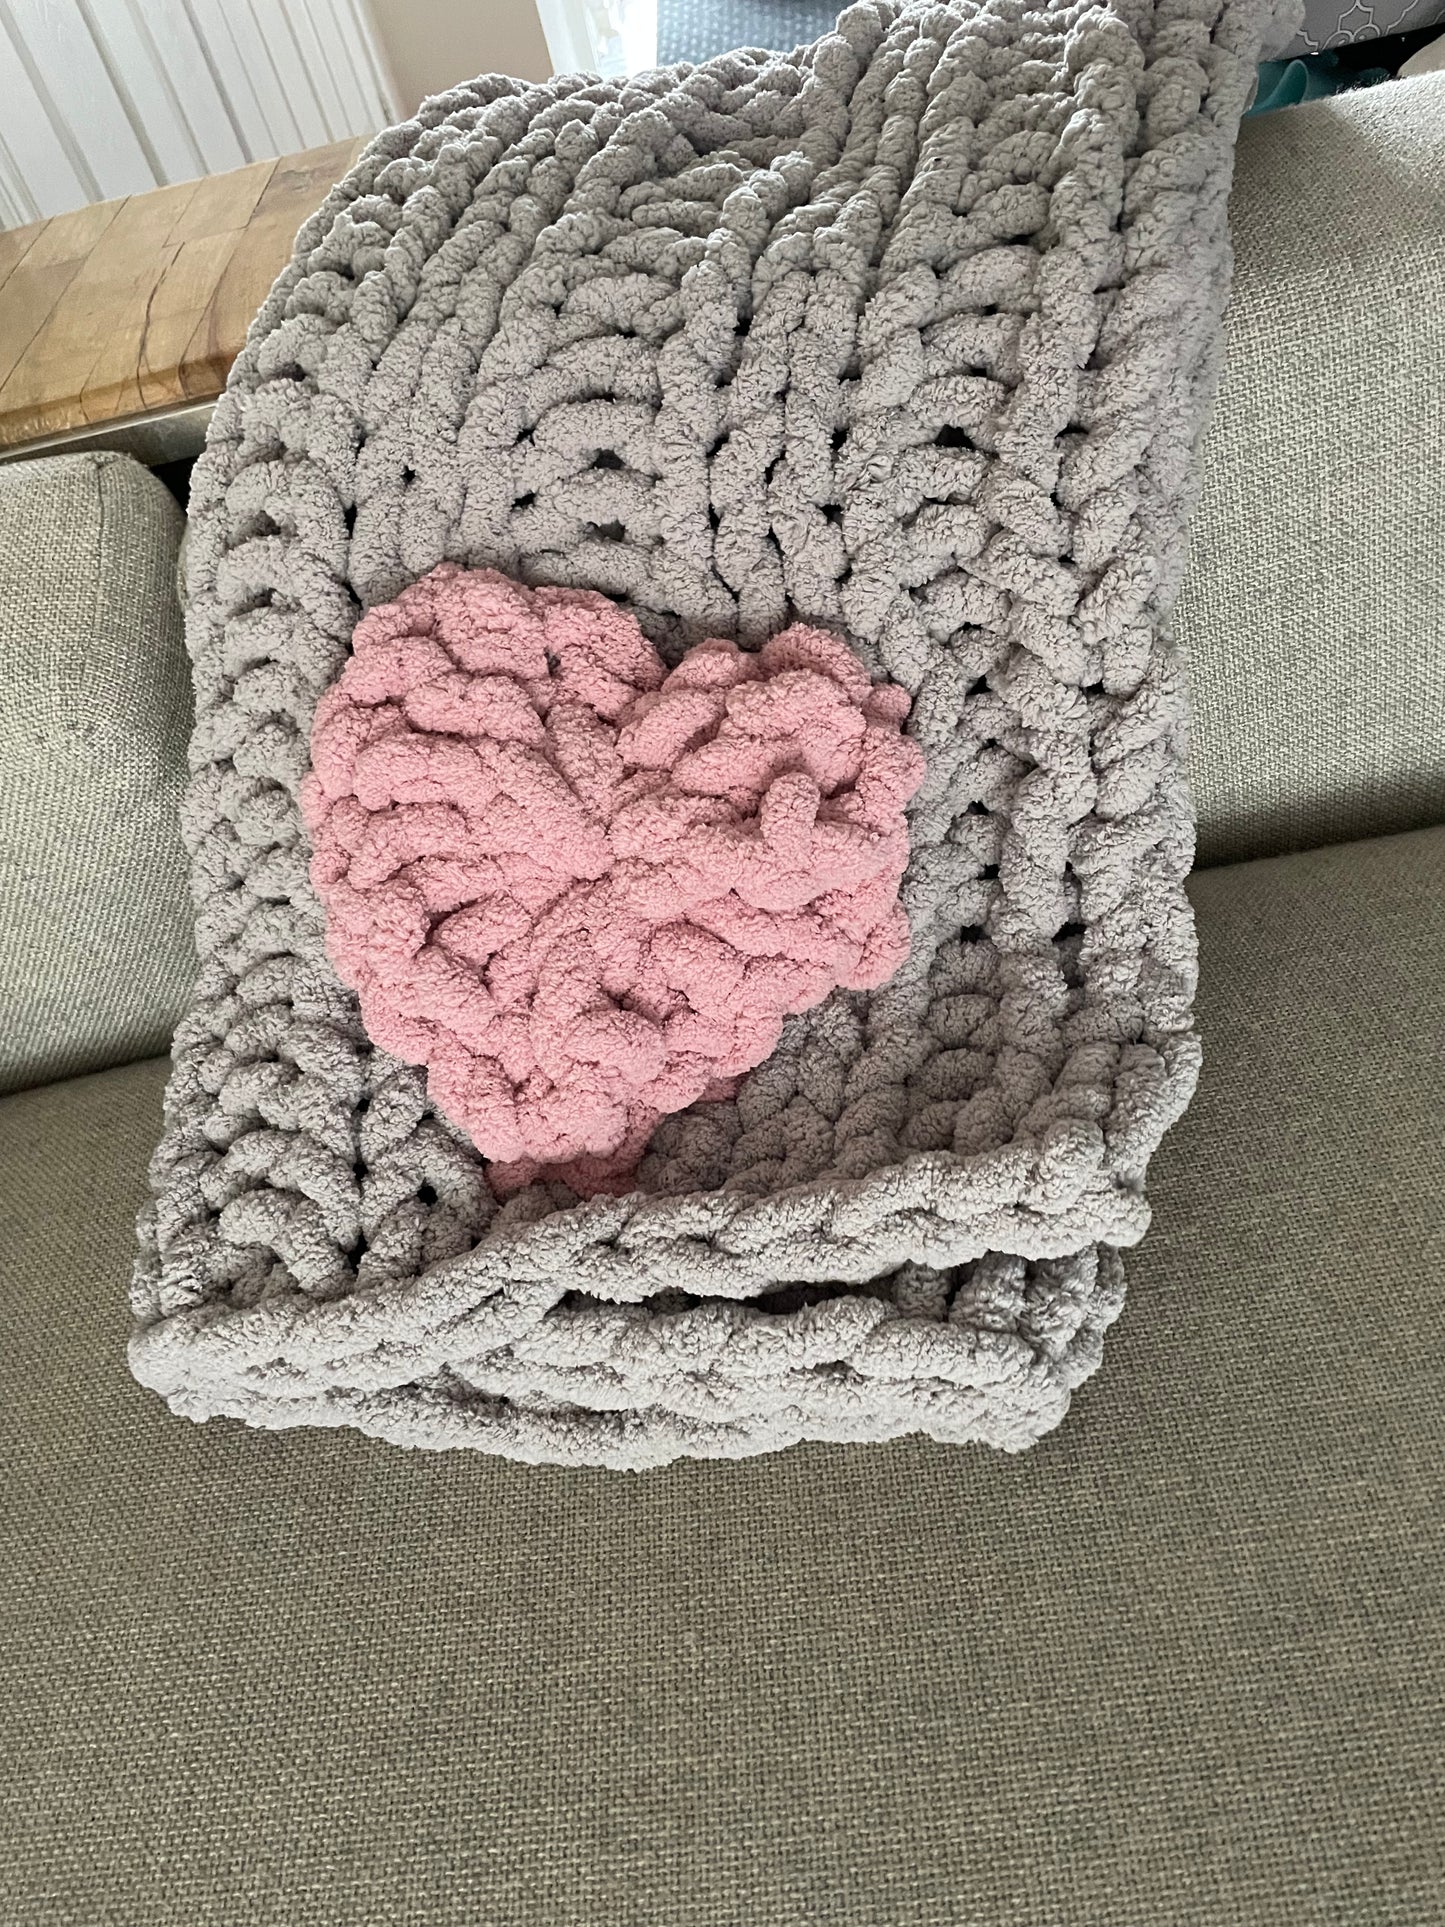 *PRE-ORDER - Healing Hand, Chunky Knit Blanket Light Grey with Soft Pink Heart - double sided heart design